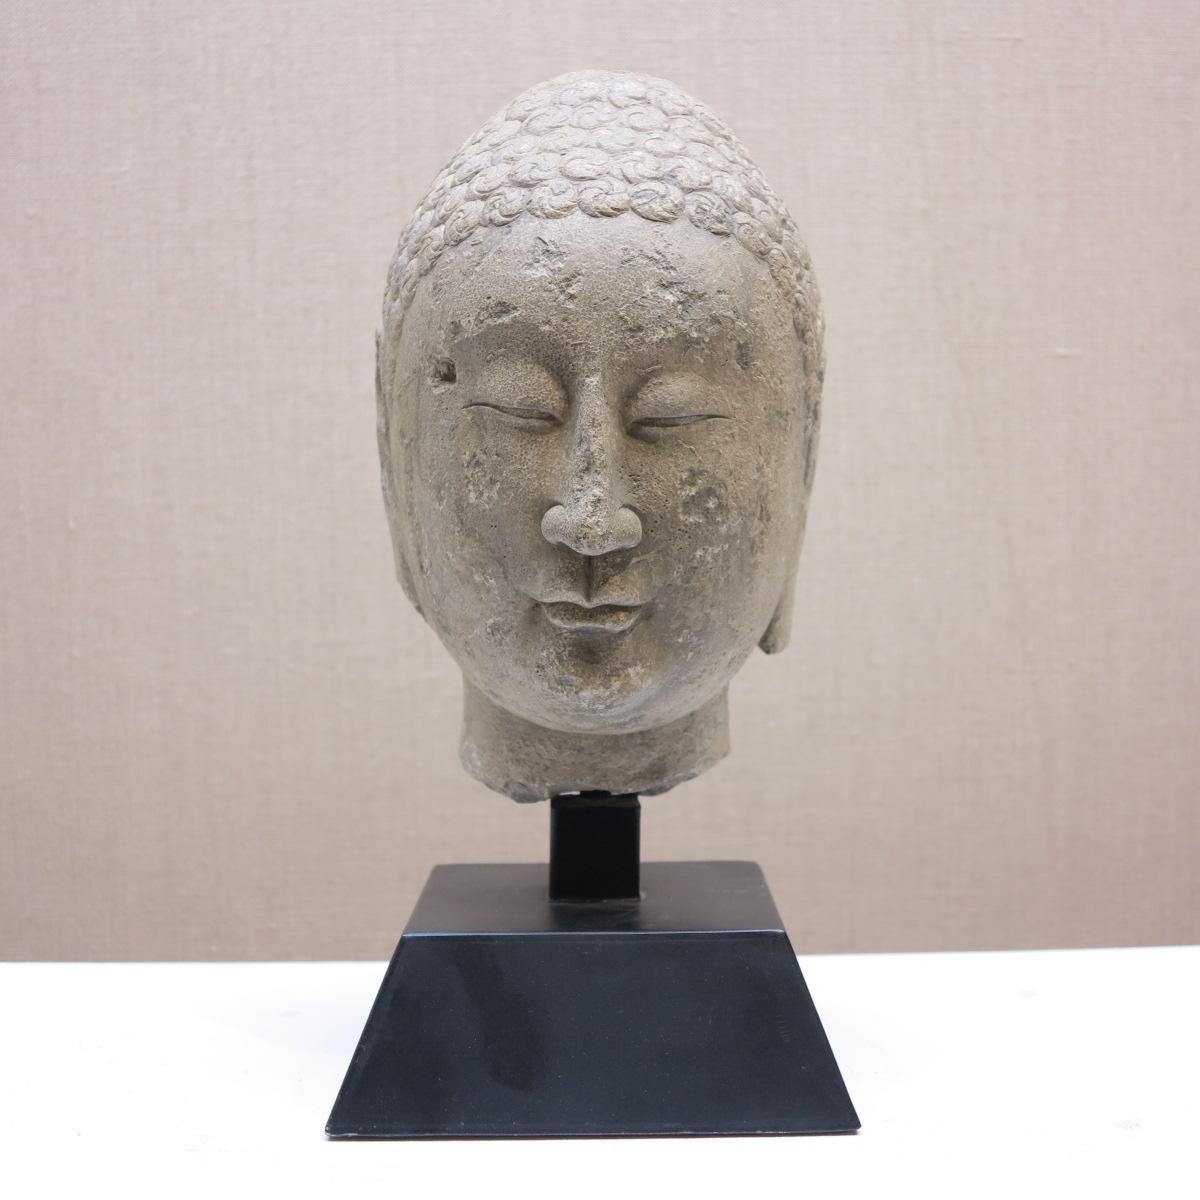 Unknown Figurative Sculpture - 6th-century Northern Qi Dynasty Head of Buddha Chinese Bust Sculpture